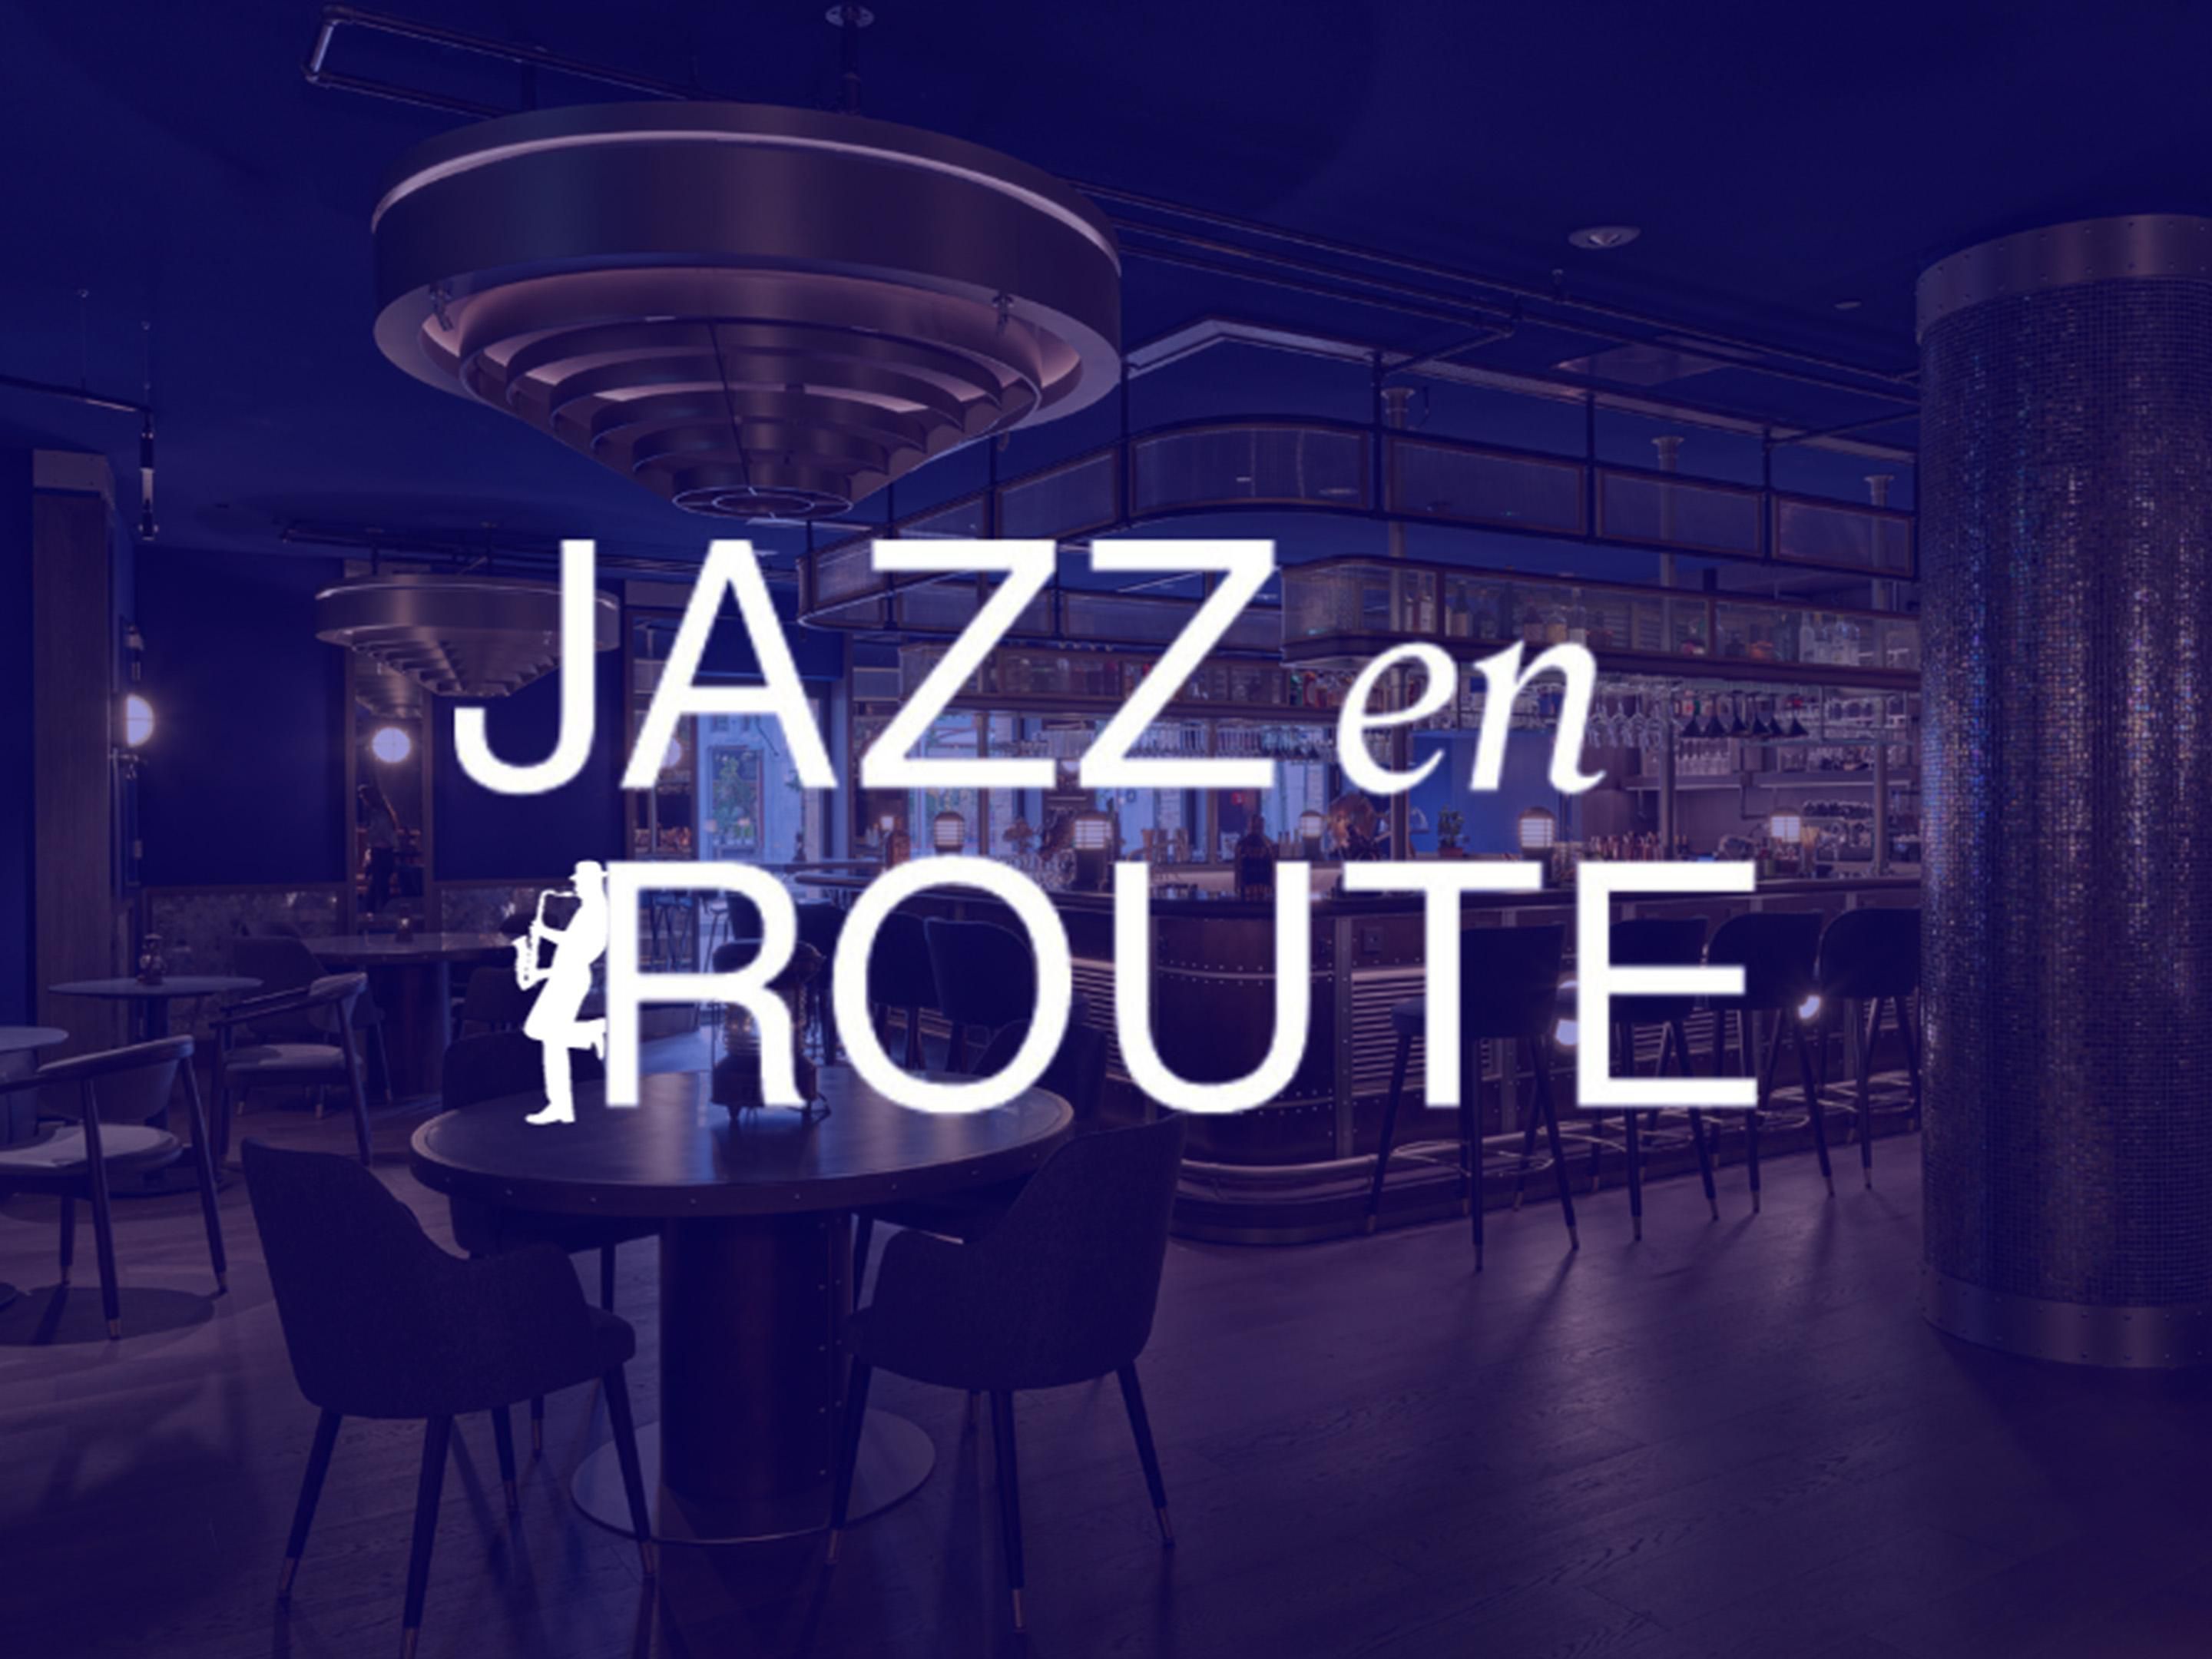 A night in Paris for Jazz en Route